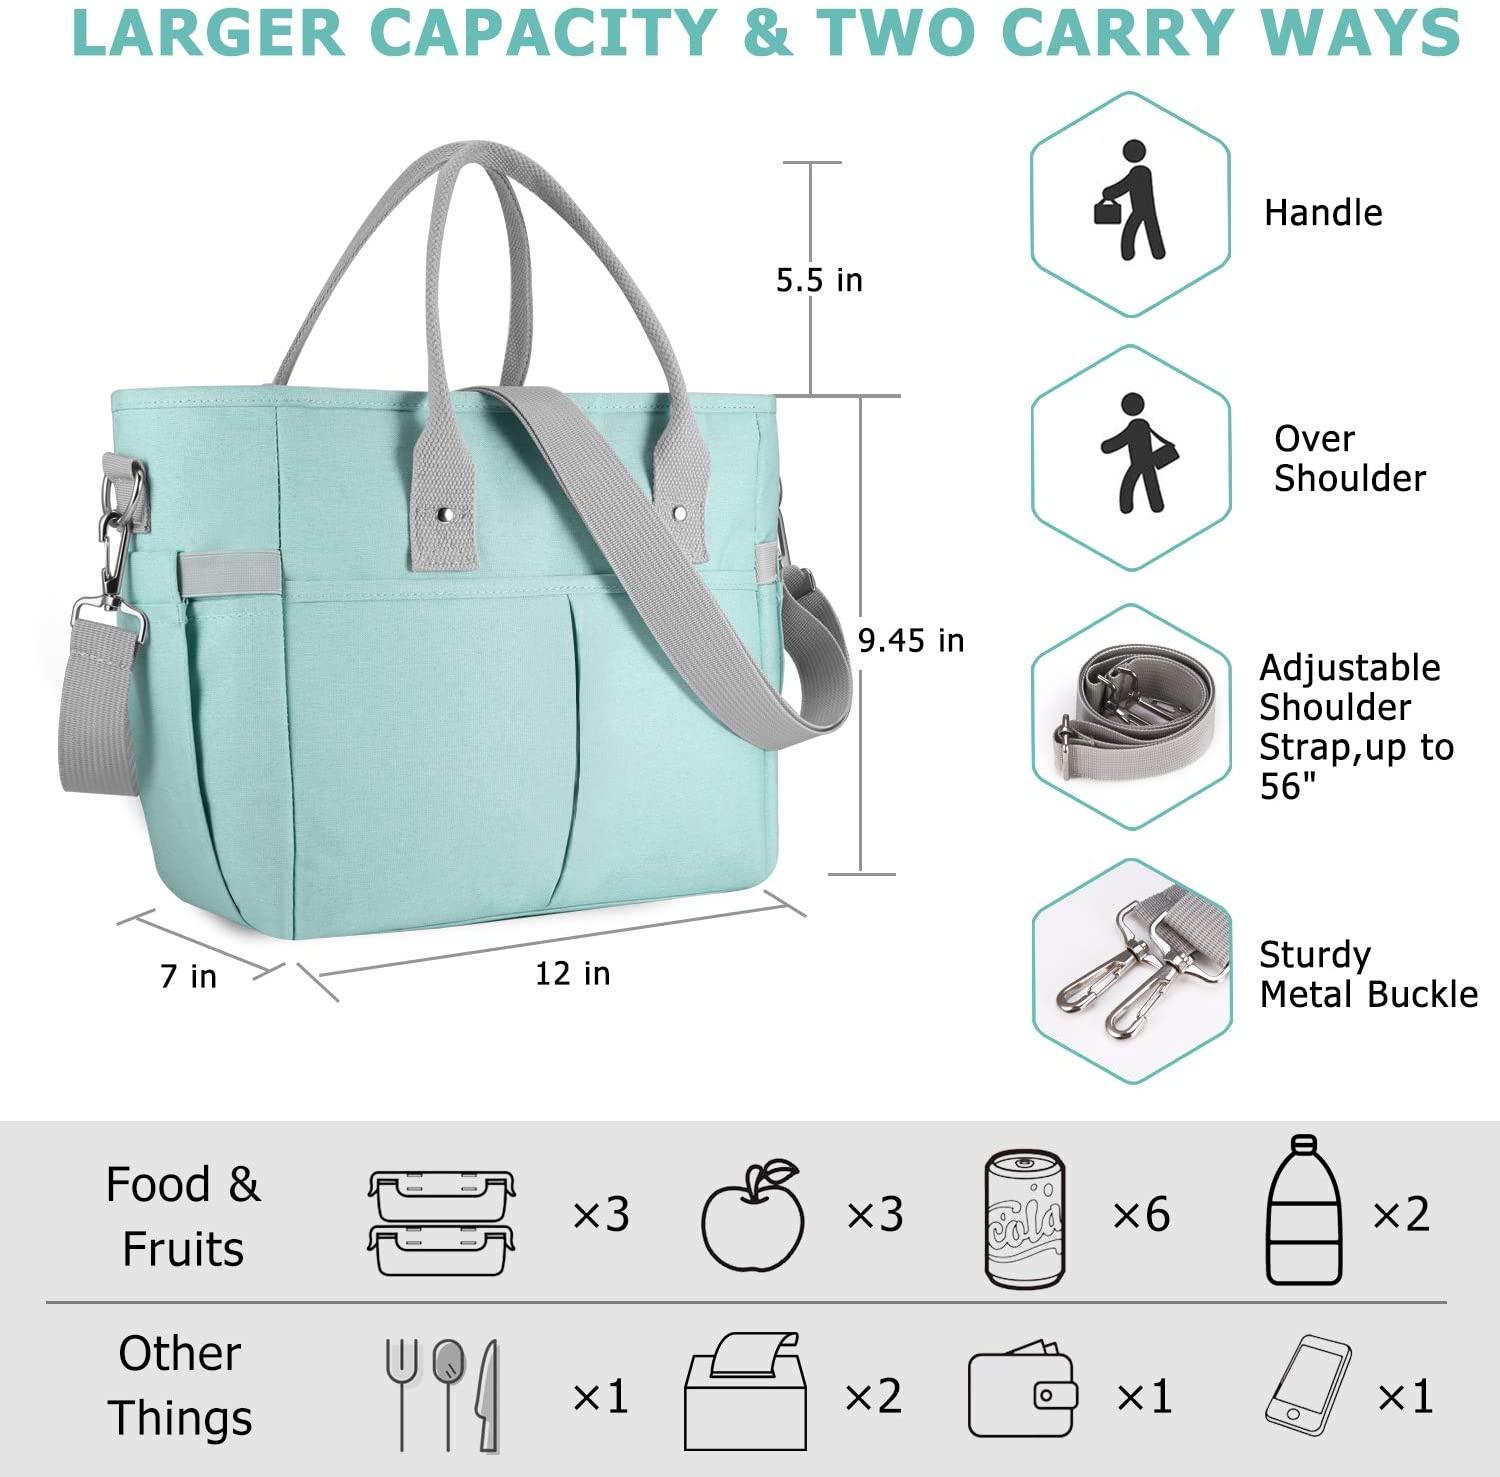 2022 Women Insulated Tote Bags Thermal Food Bag Cooler Lunch Storage Zipper Organizer Handbag With Handles And Shoulder Strap